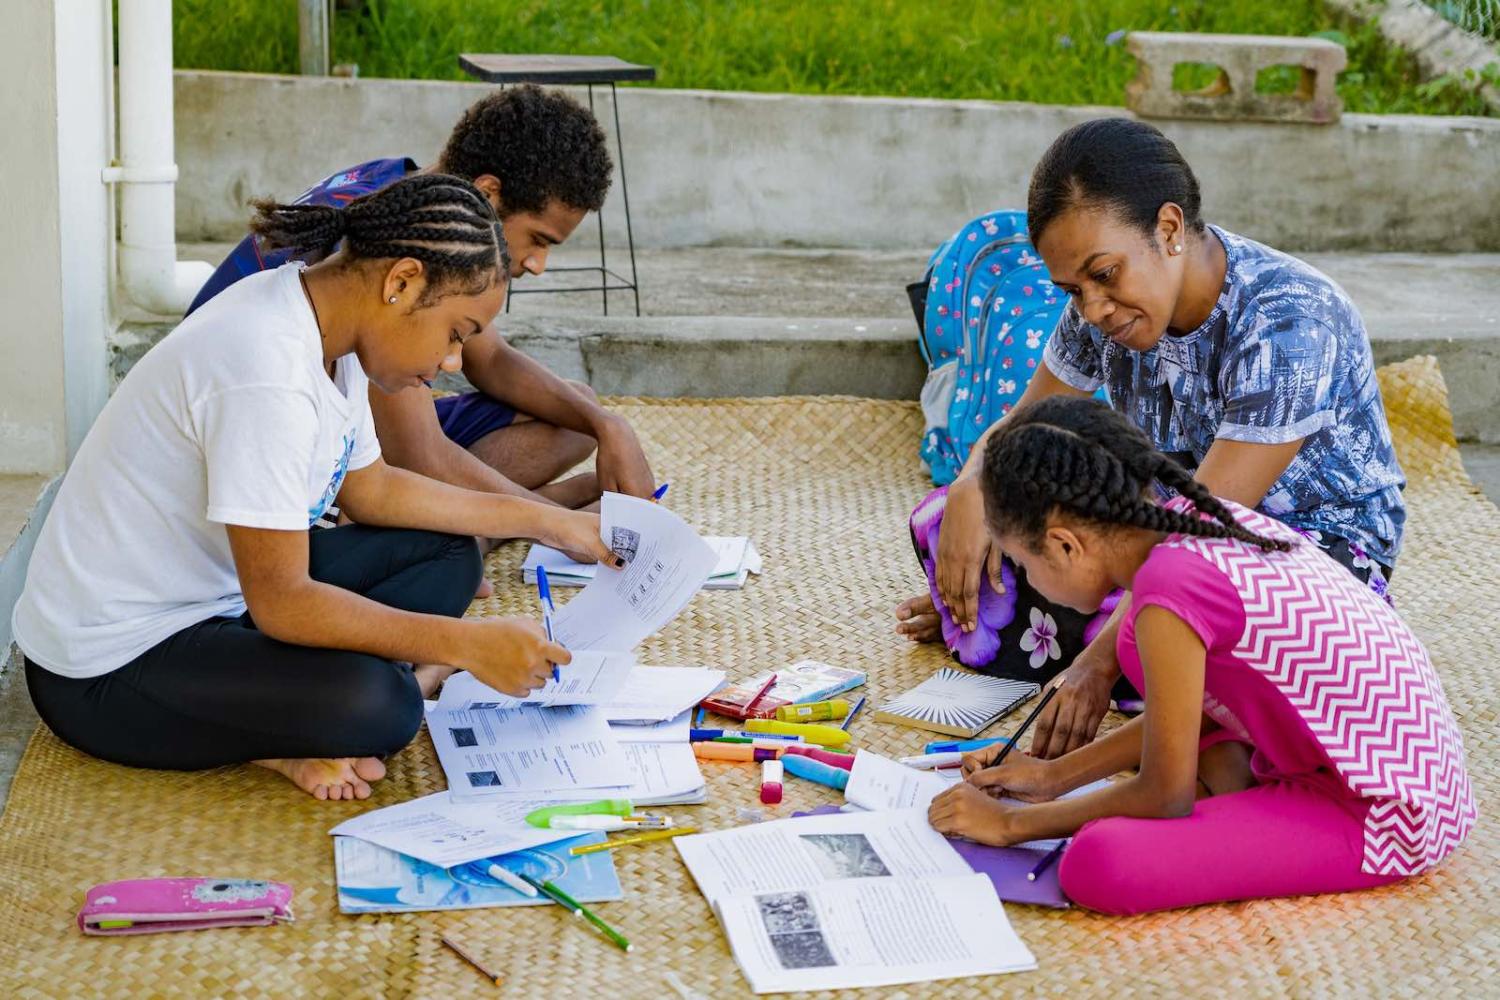 Home schooling in Fiji during the Covid-19 lockdown (Asian Development Bank/Flickr)